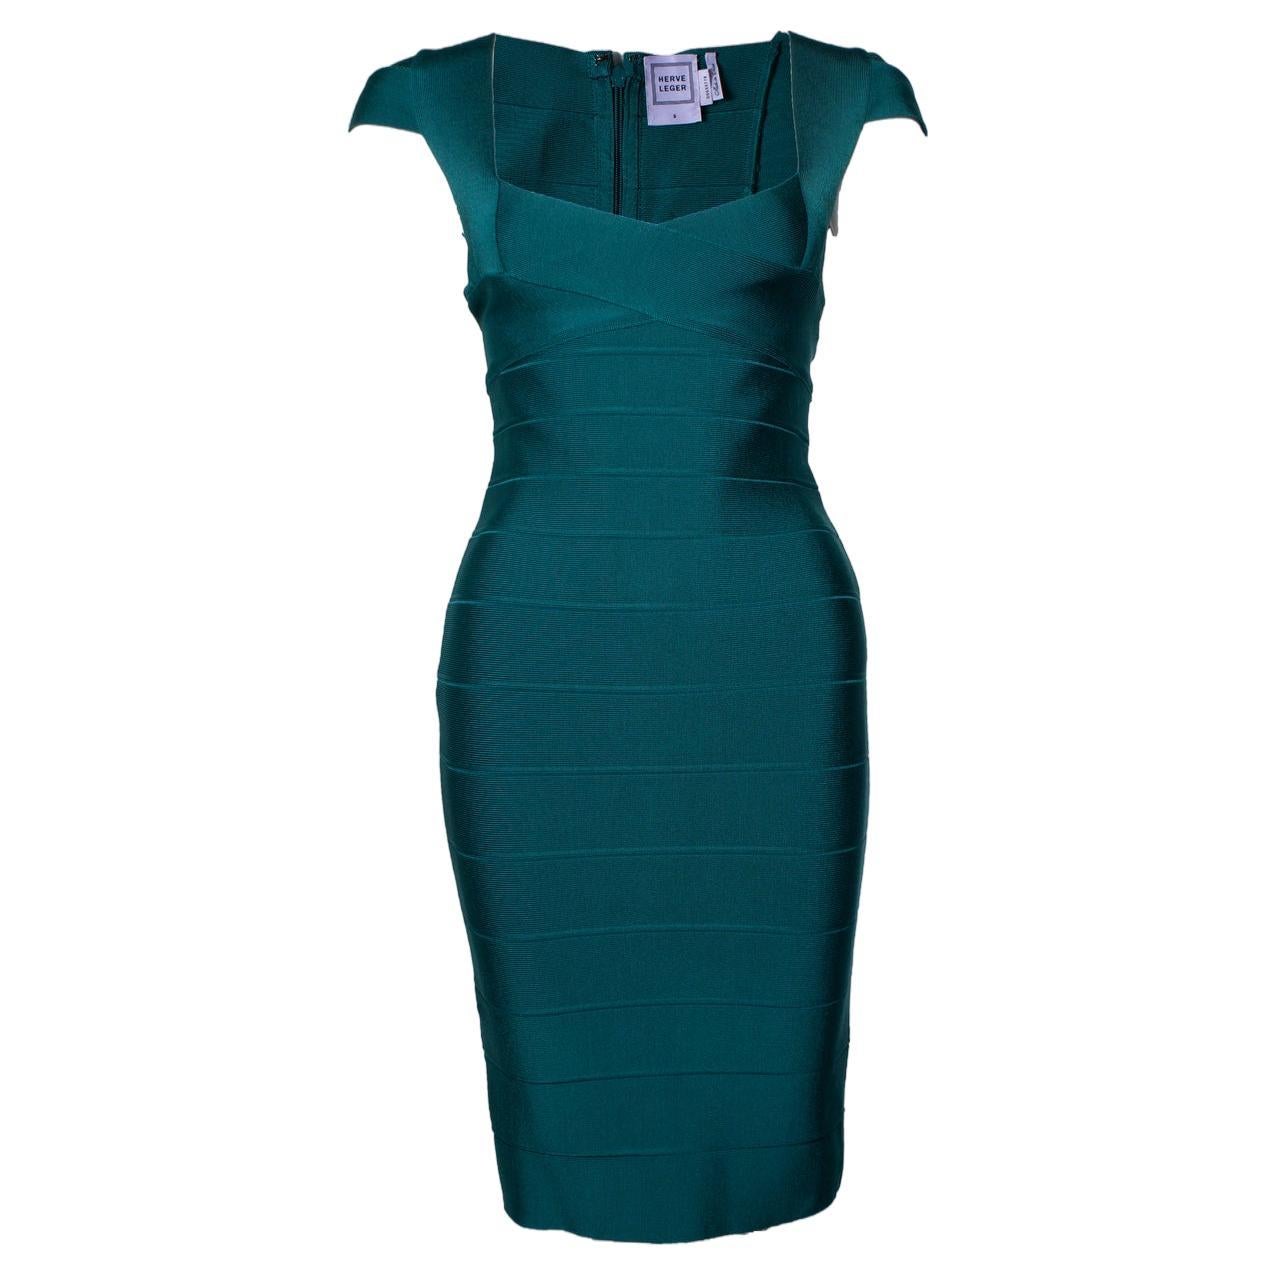 Herve Leger, Bodycon dress in green